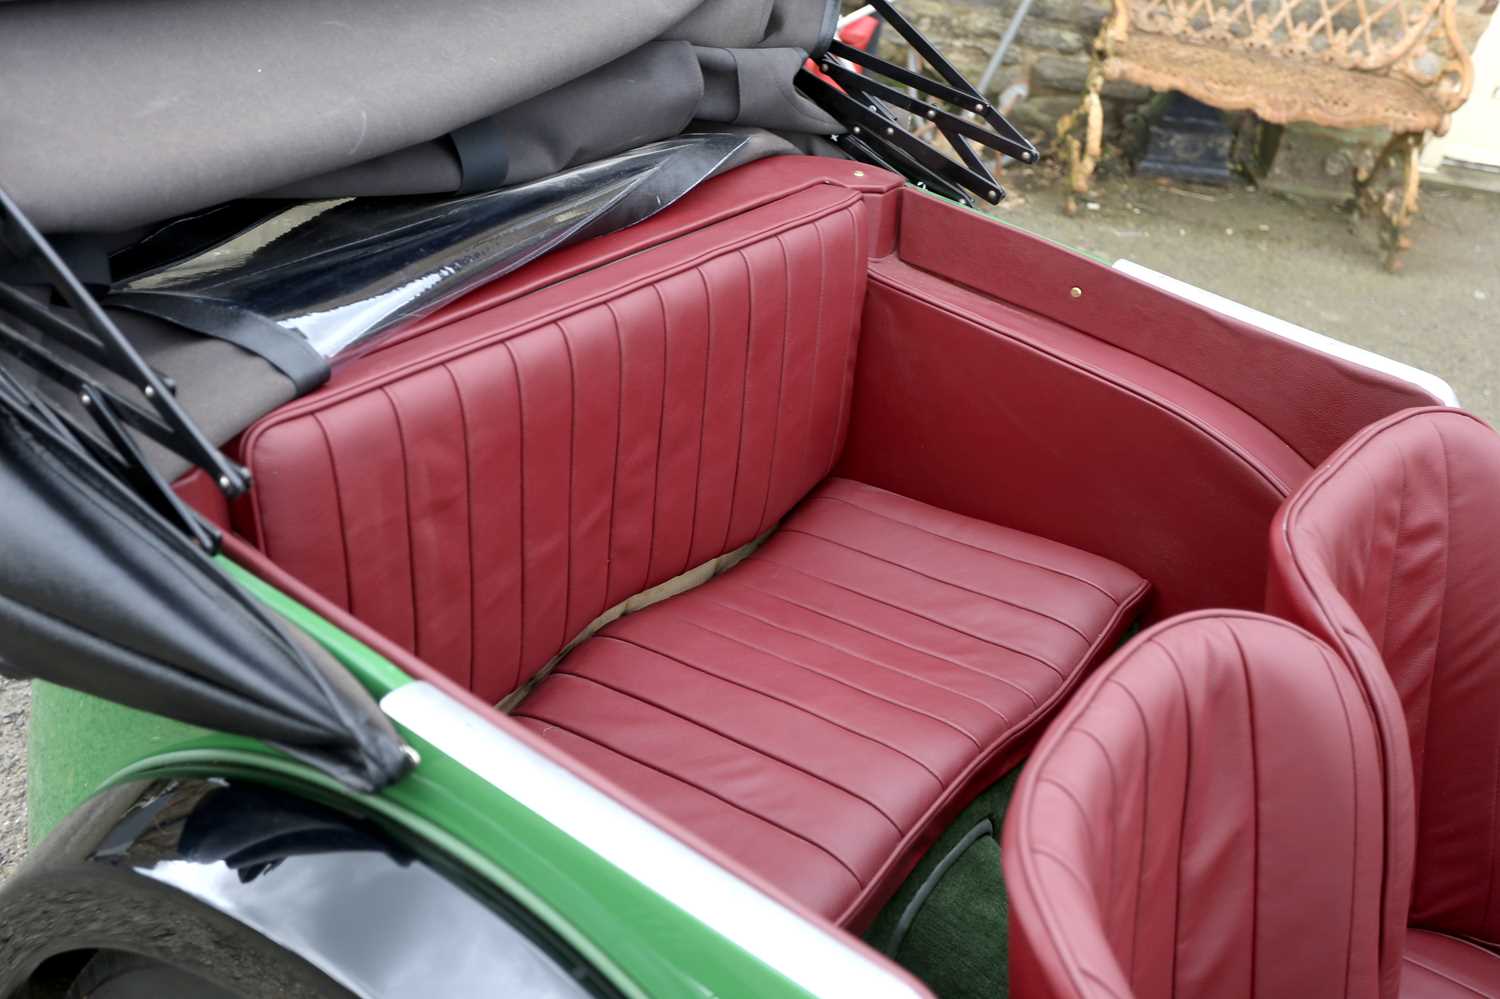 A 1932 MG F-Type Magna, GY 1698, converted from a two seater to a four seater and fully restored. - Image 13 of 21